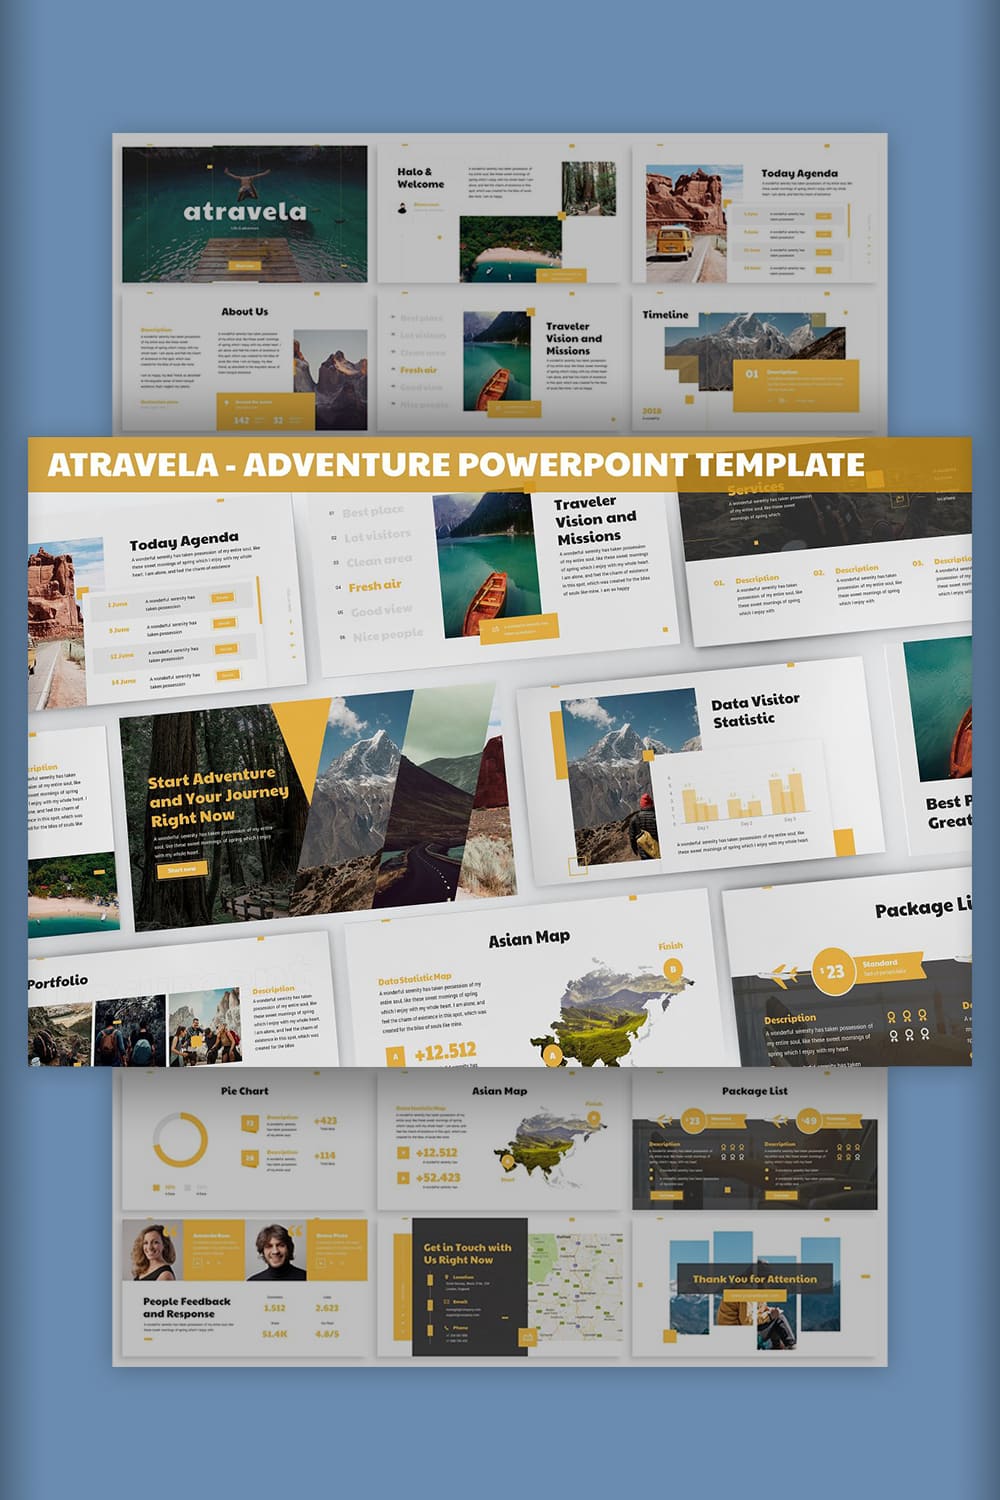 Atravela - Adventure Powerpoint Template Pinterest image with slides preview.